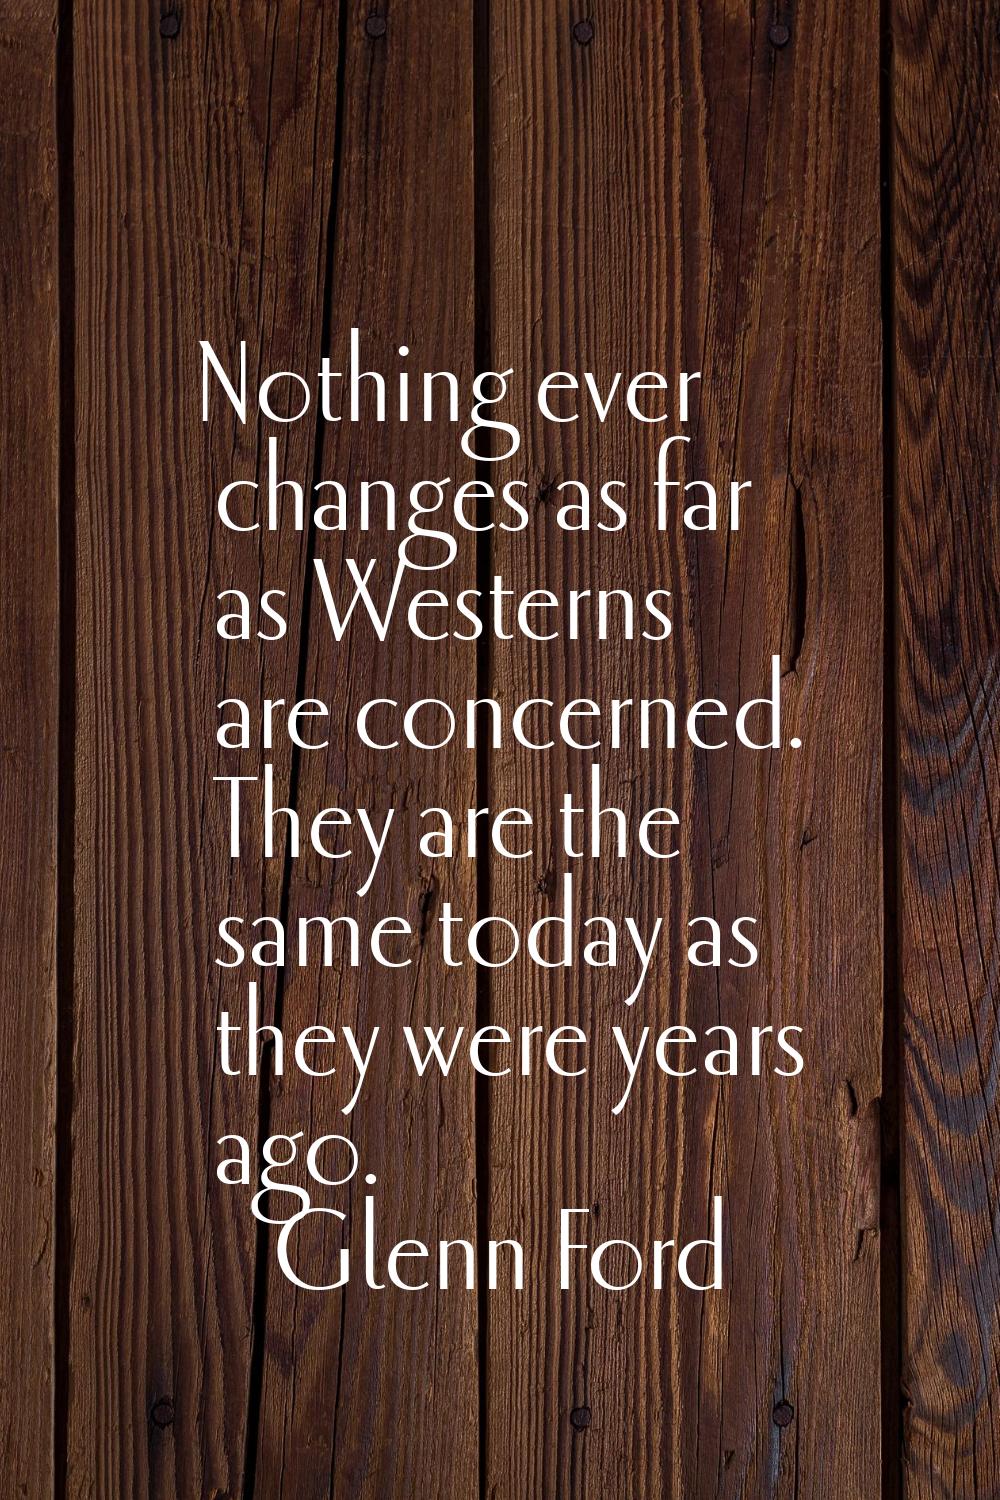 Nothing ever changes as far as Westerns are concerned. They are the same today as they were years a